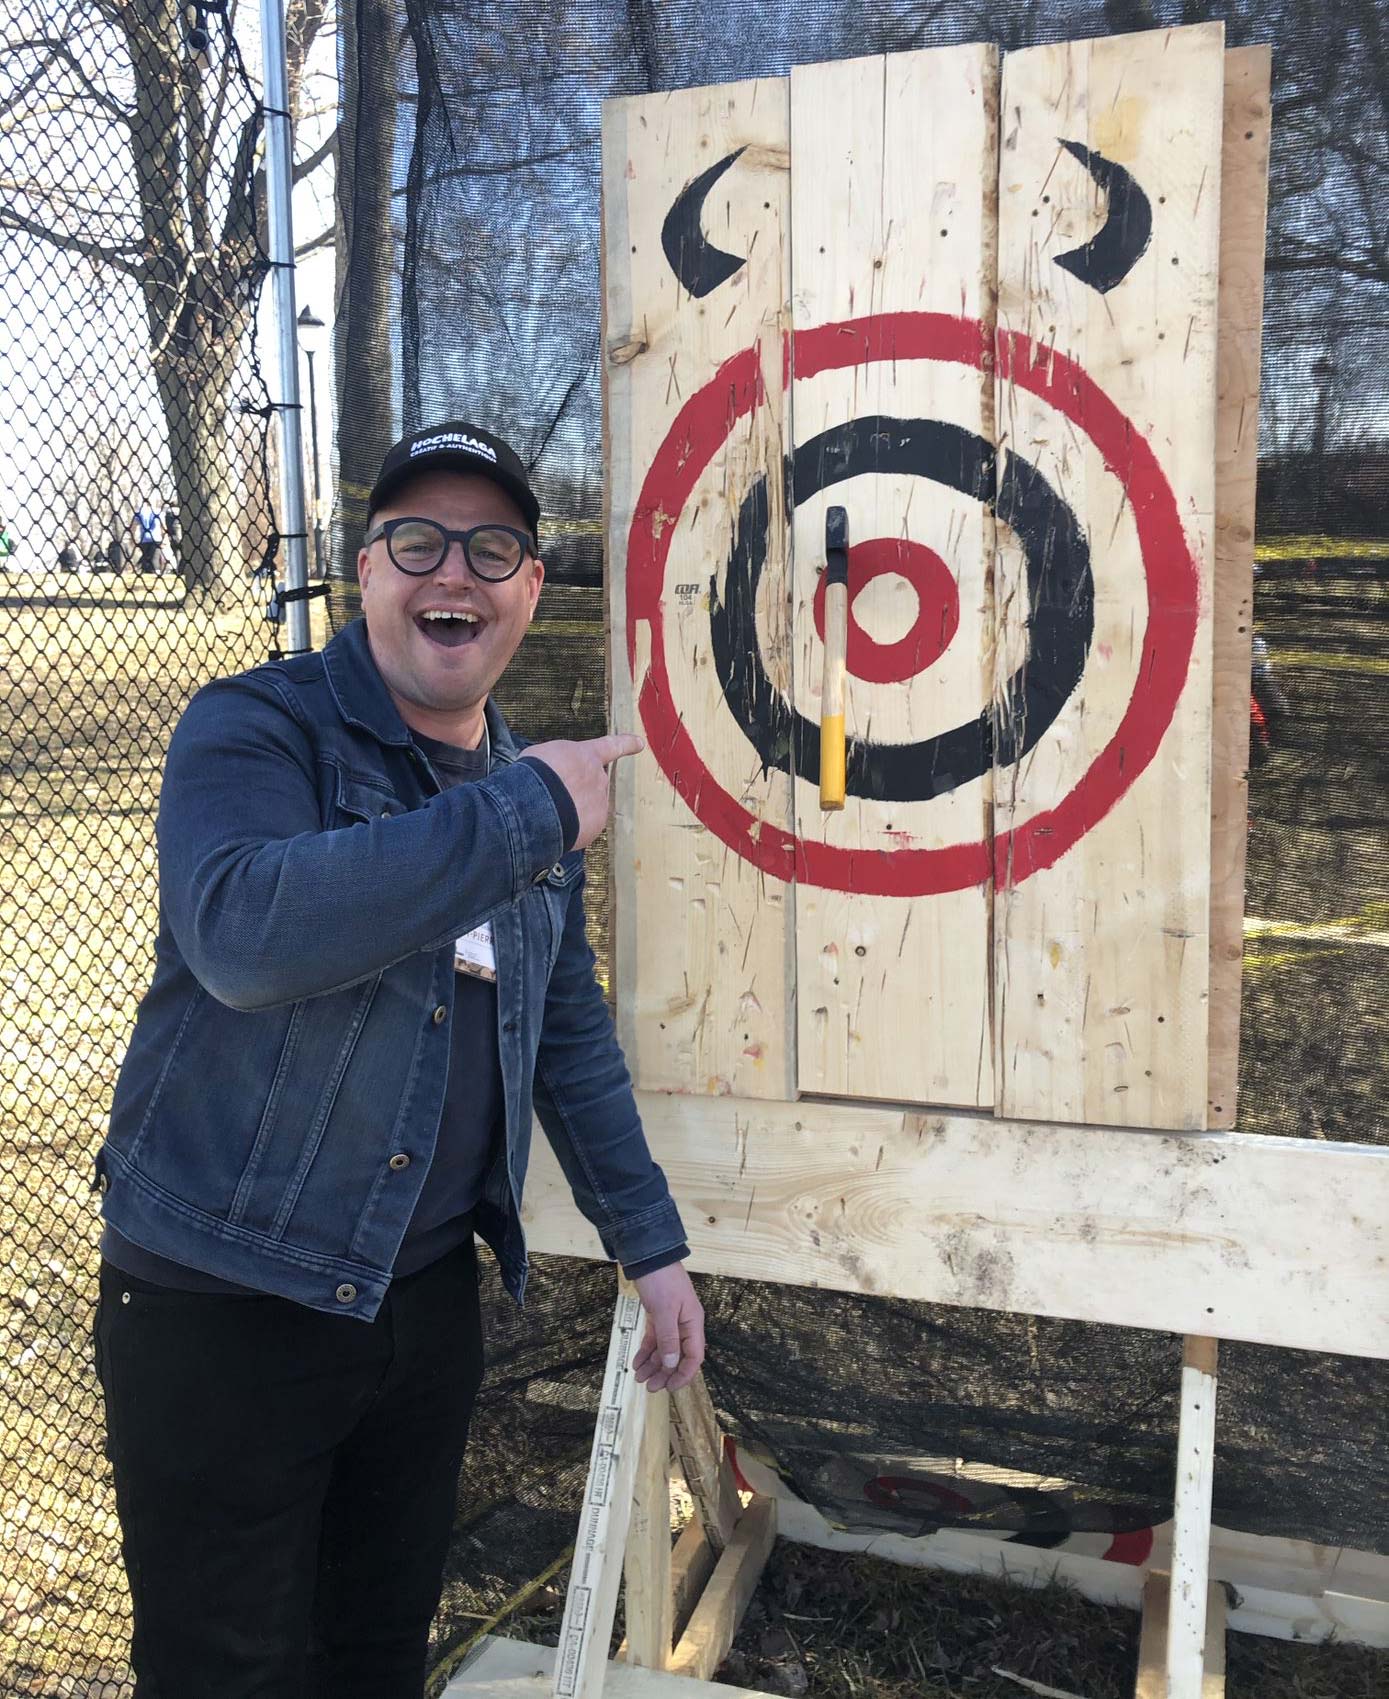 Maniax Laval / Axe Throwing / Danny Saint-Pierre